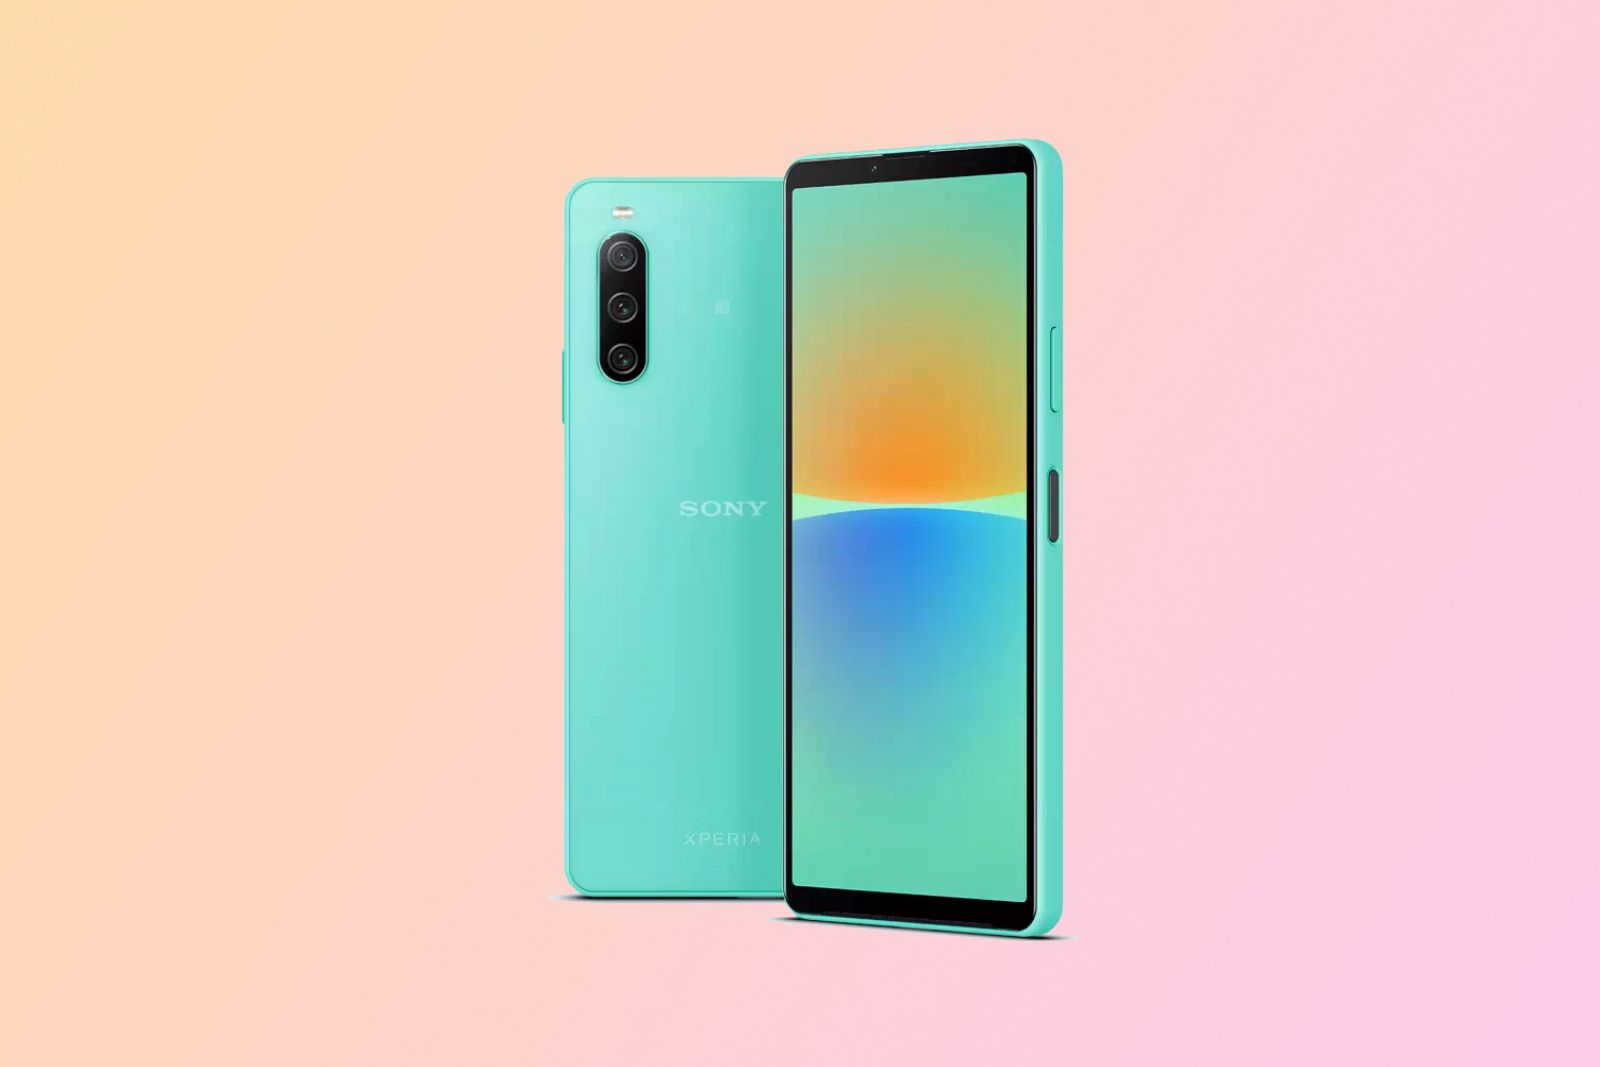 Sony claims Xperia 10 V is the world's lightest 5G smartphone (yet